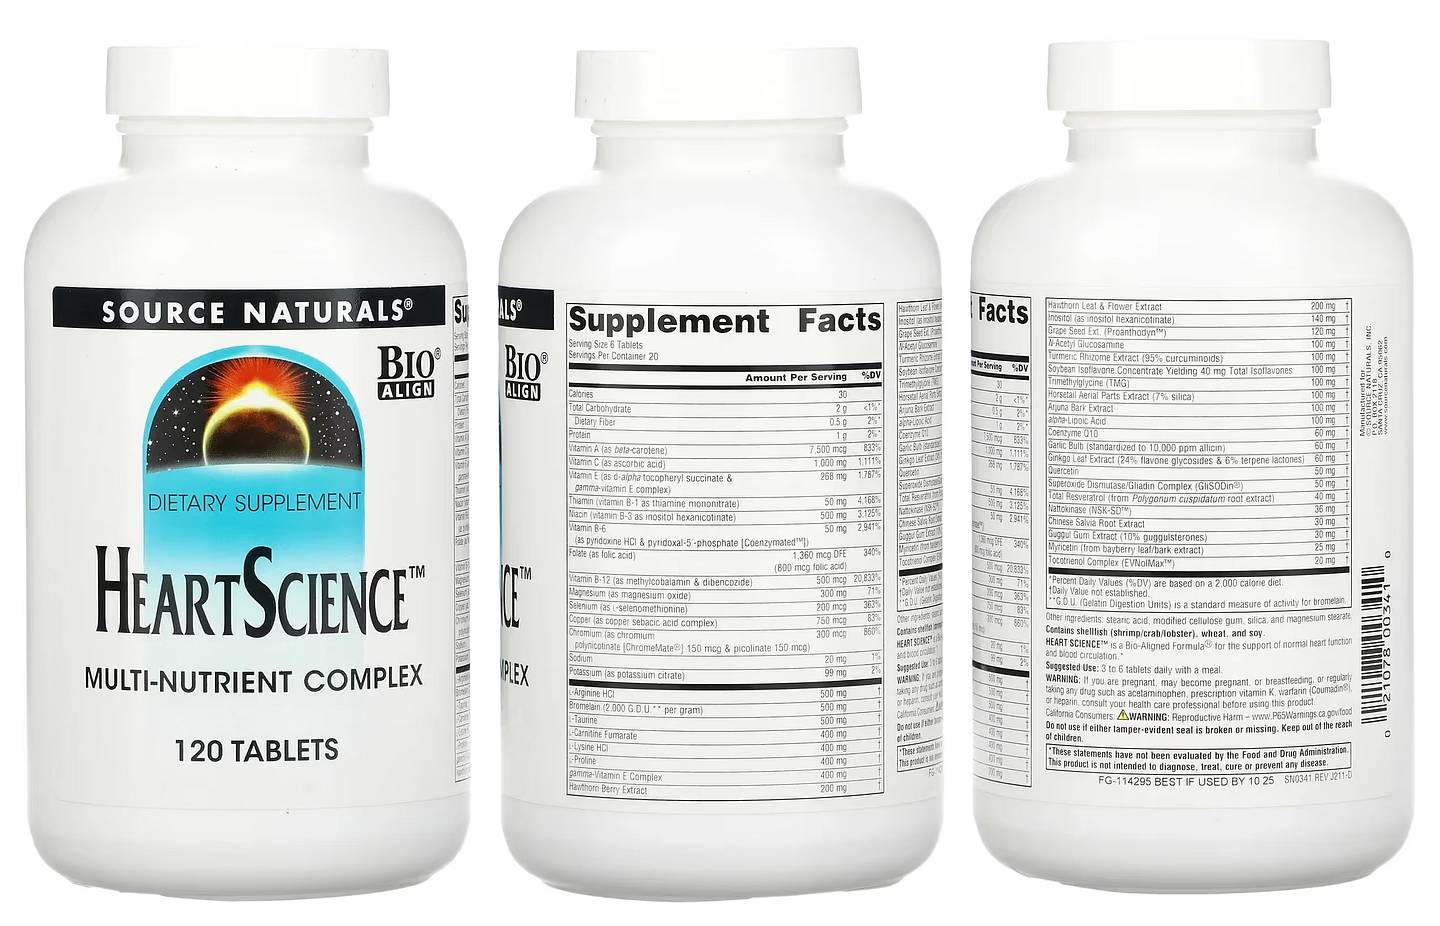 Source Naturals, Heart Science packaging